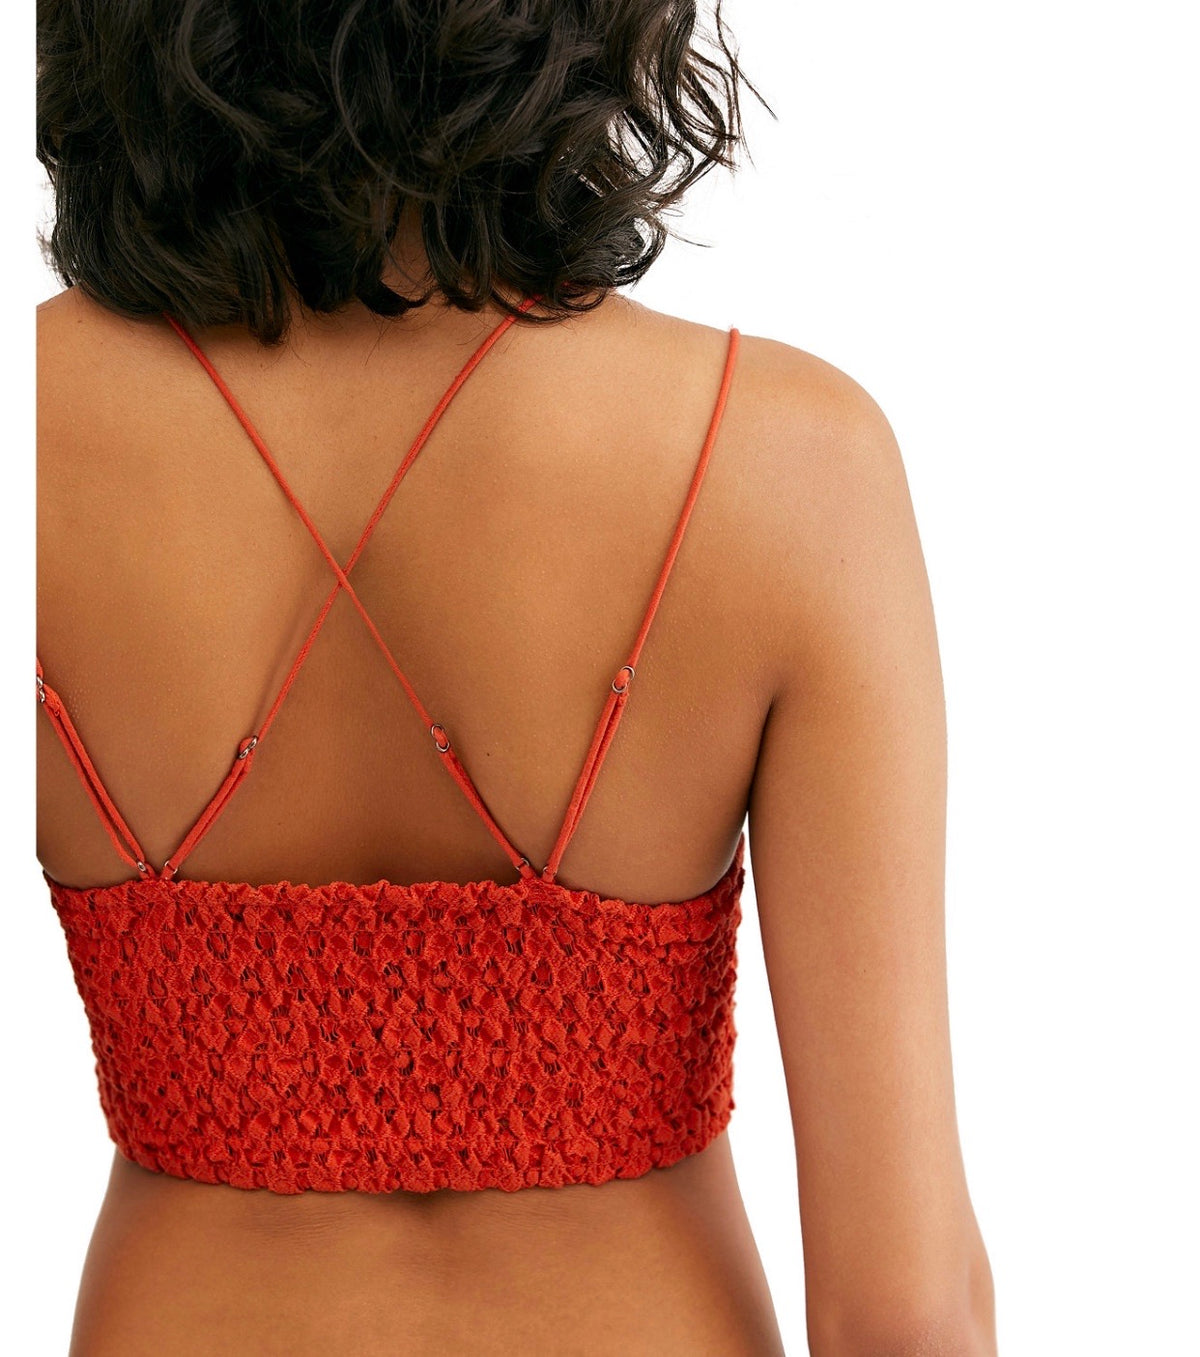 This is Love Lace Bralette - Infrared